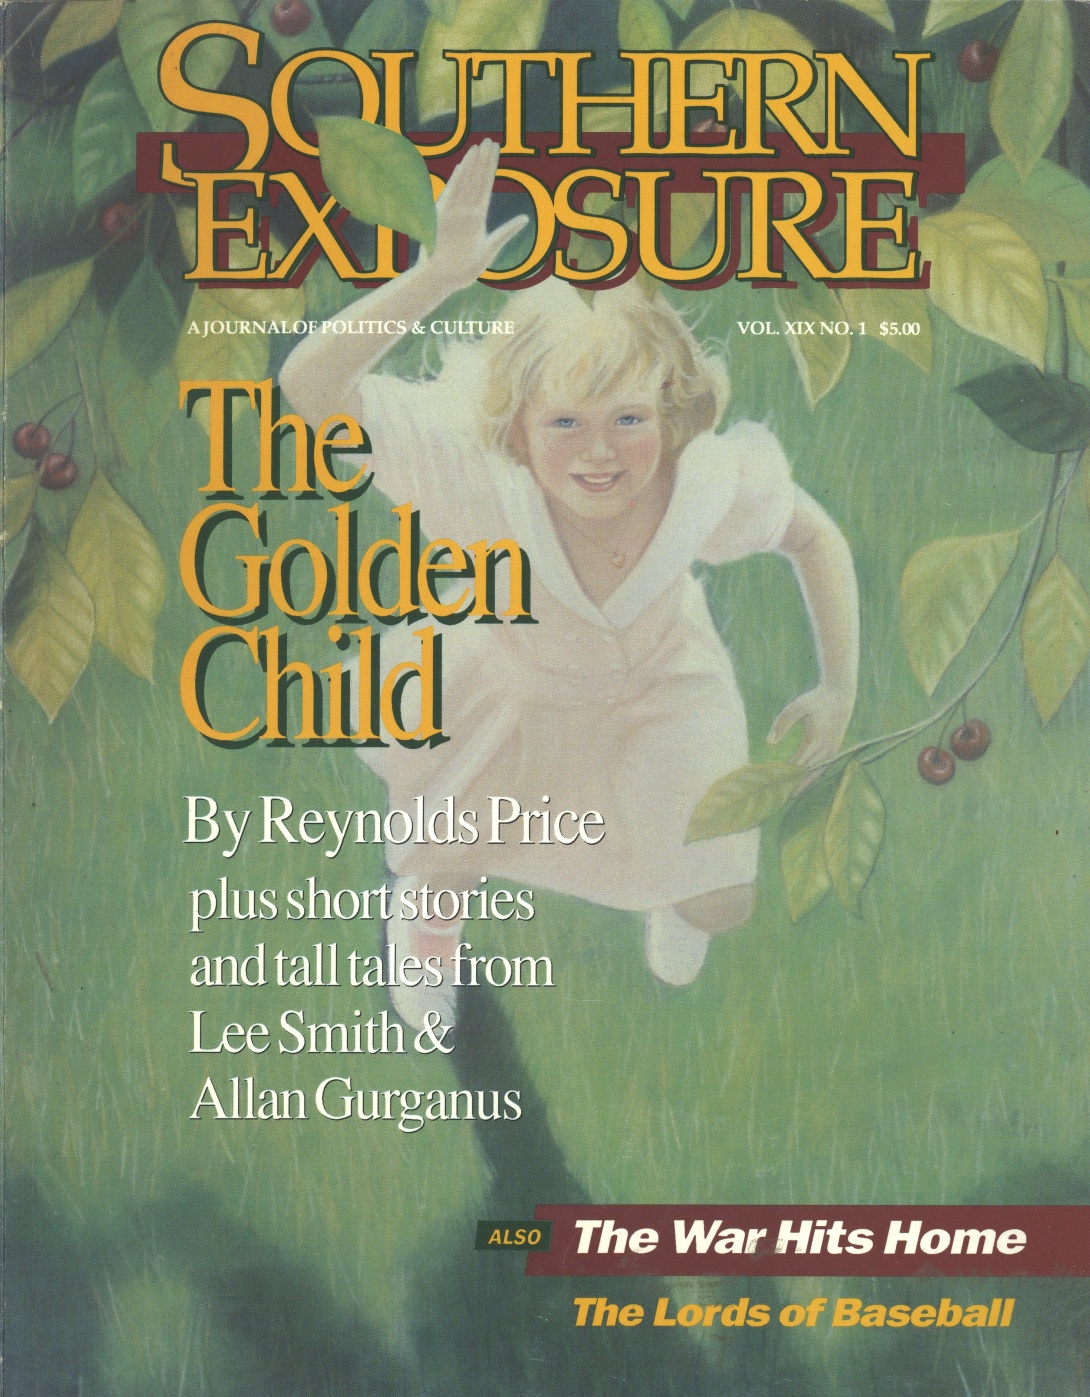 Magazine cover with painting of child, text reads "The Golden Child"